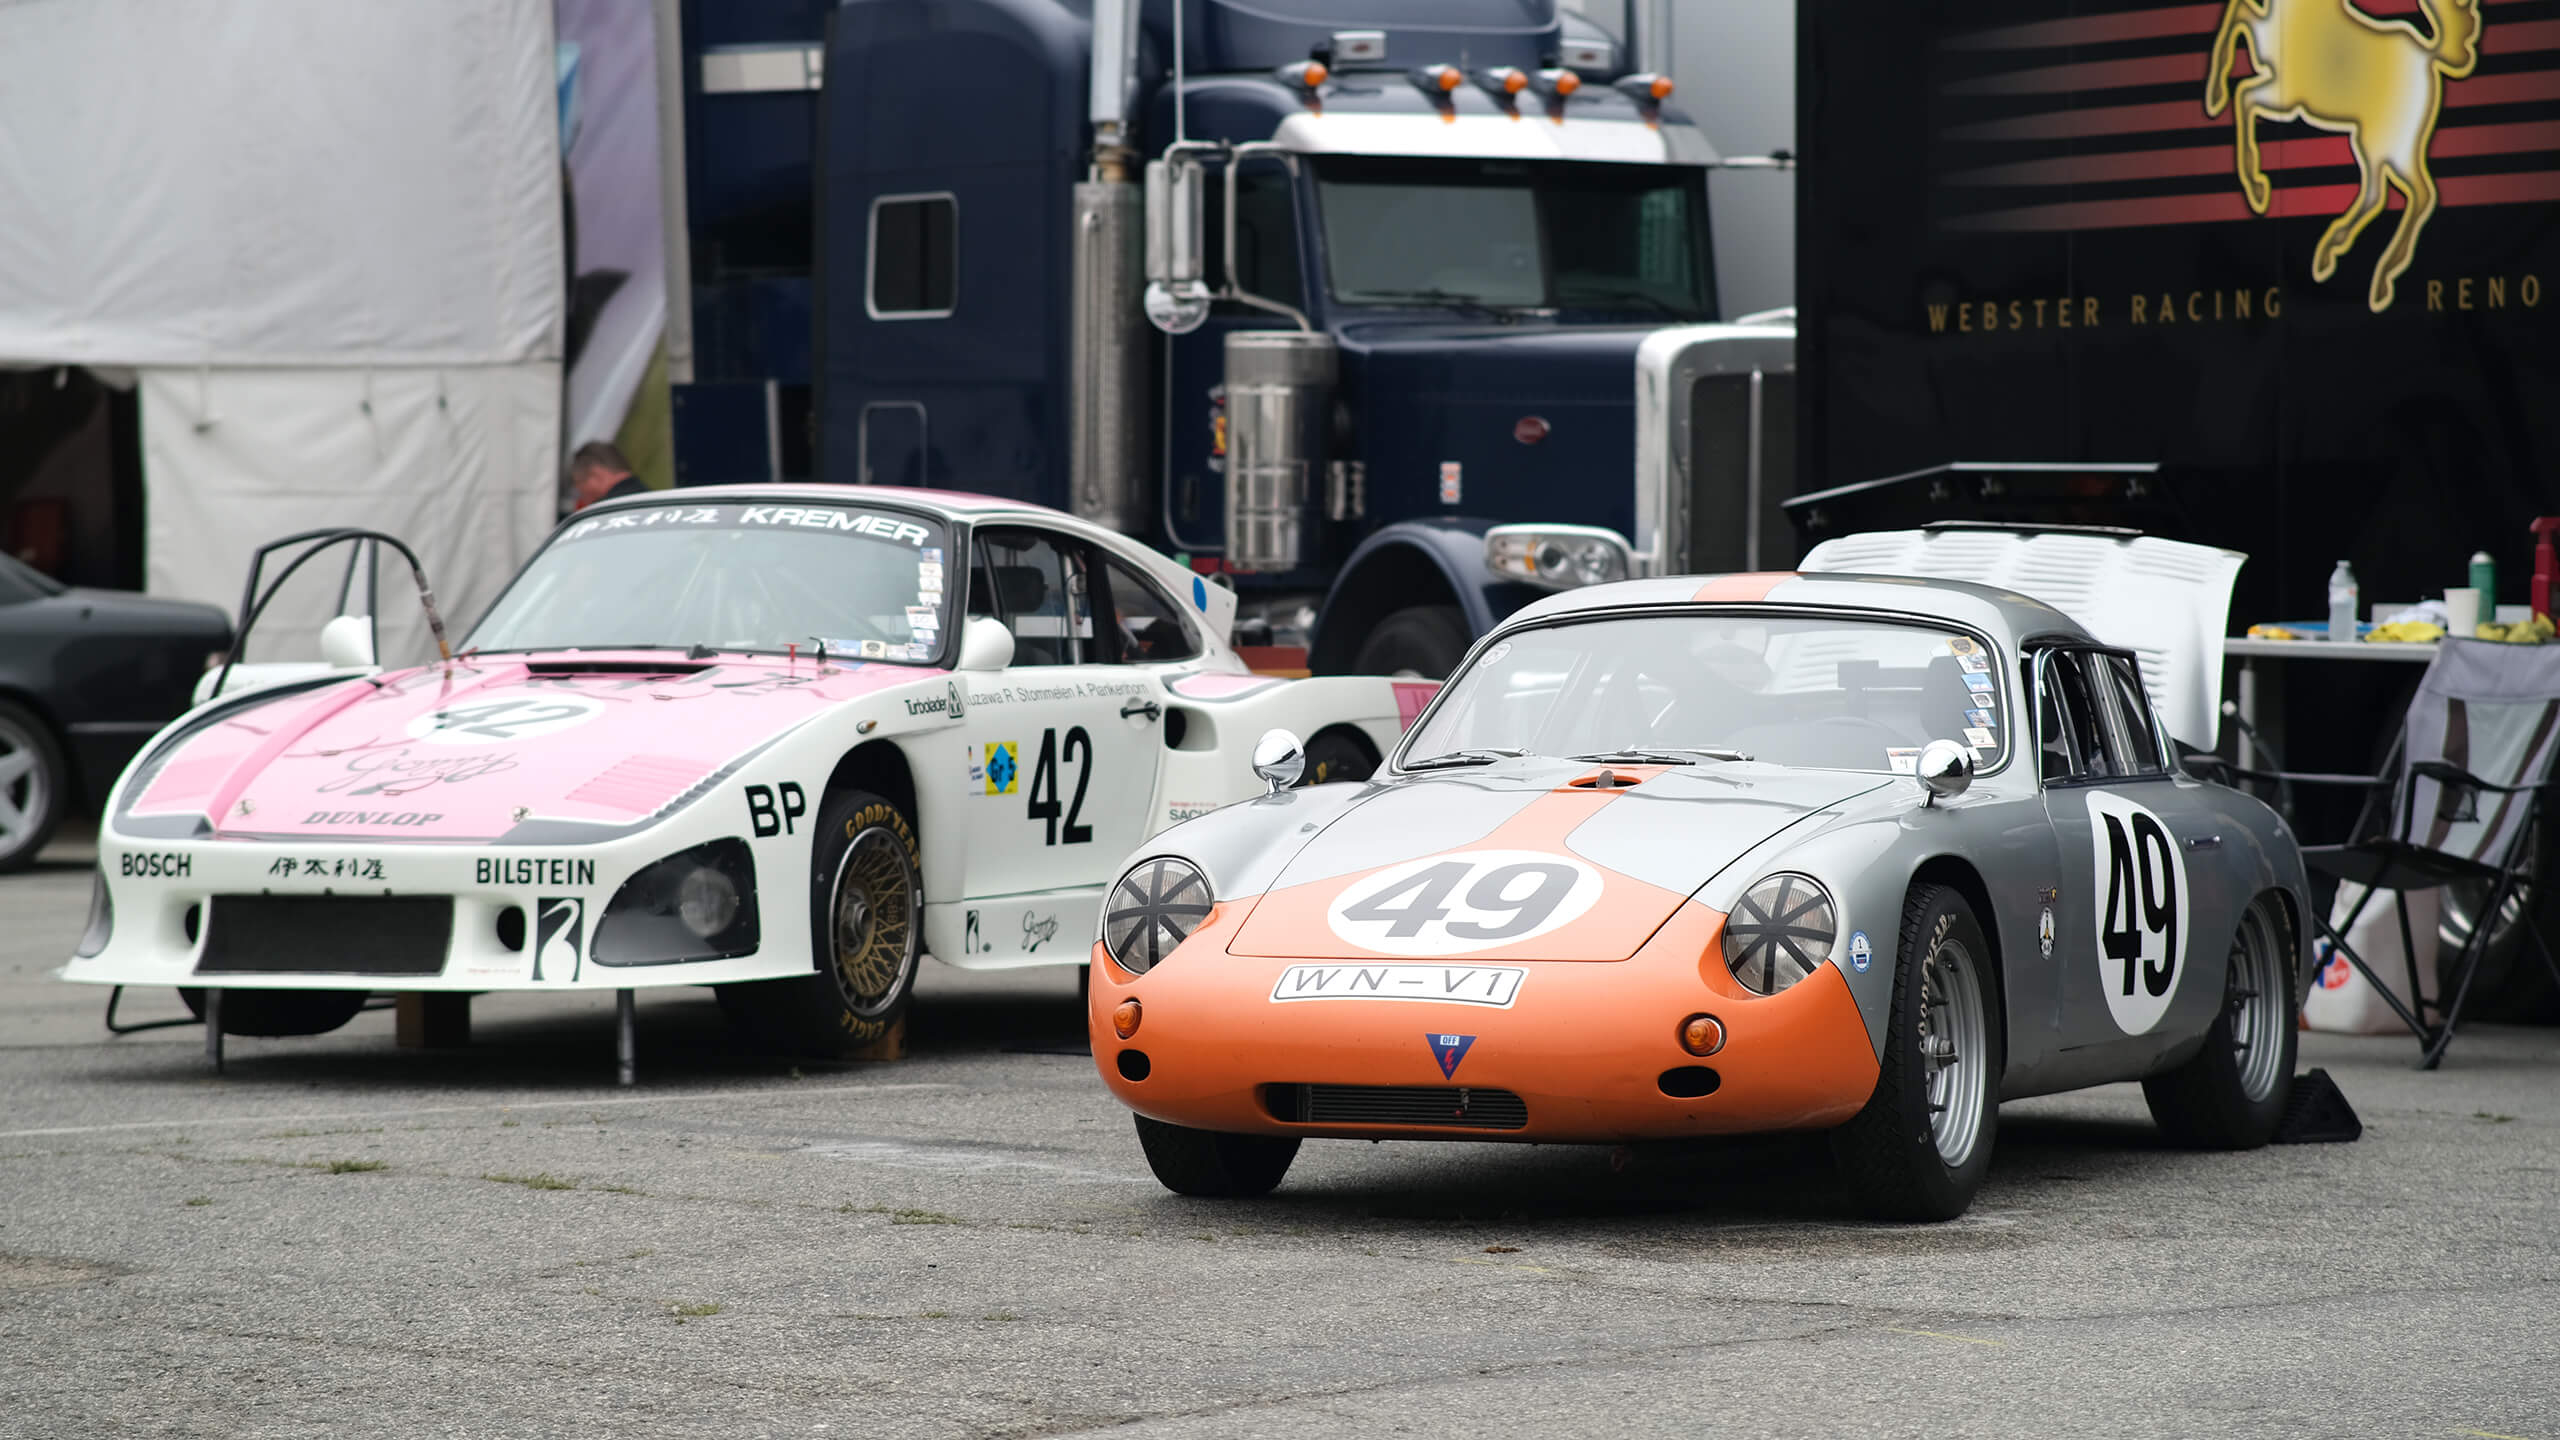 Maximum attack at The Track: The 2023 Rolex Monterey Motorsports Reunion